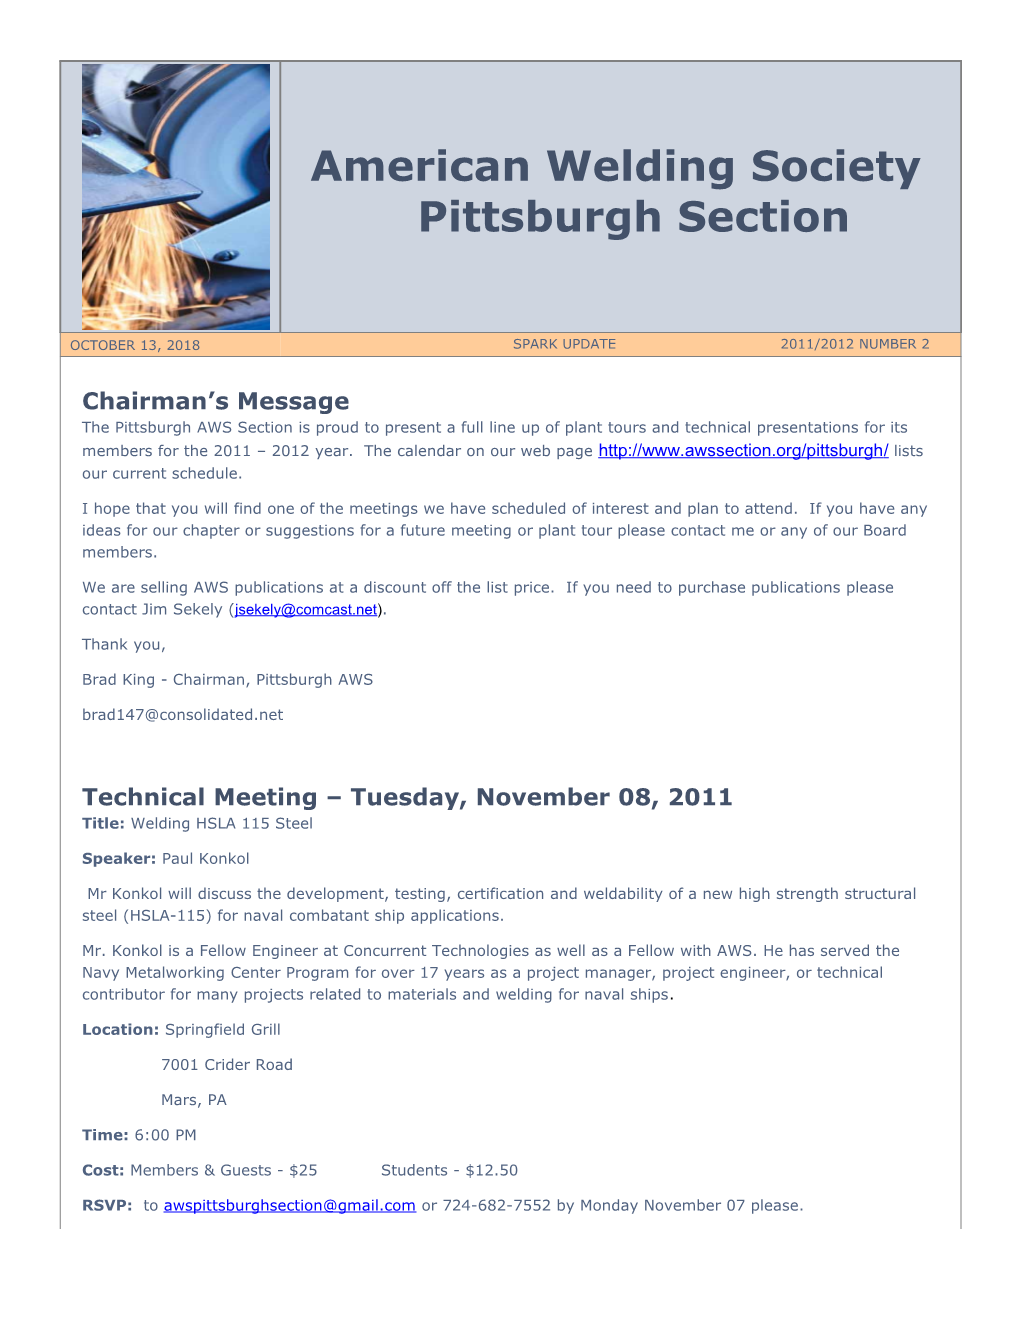 American Welding Society Pittsburgh Section